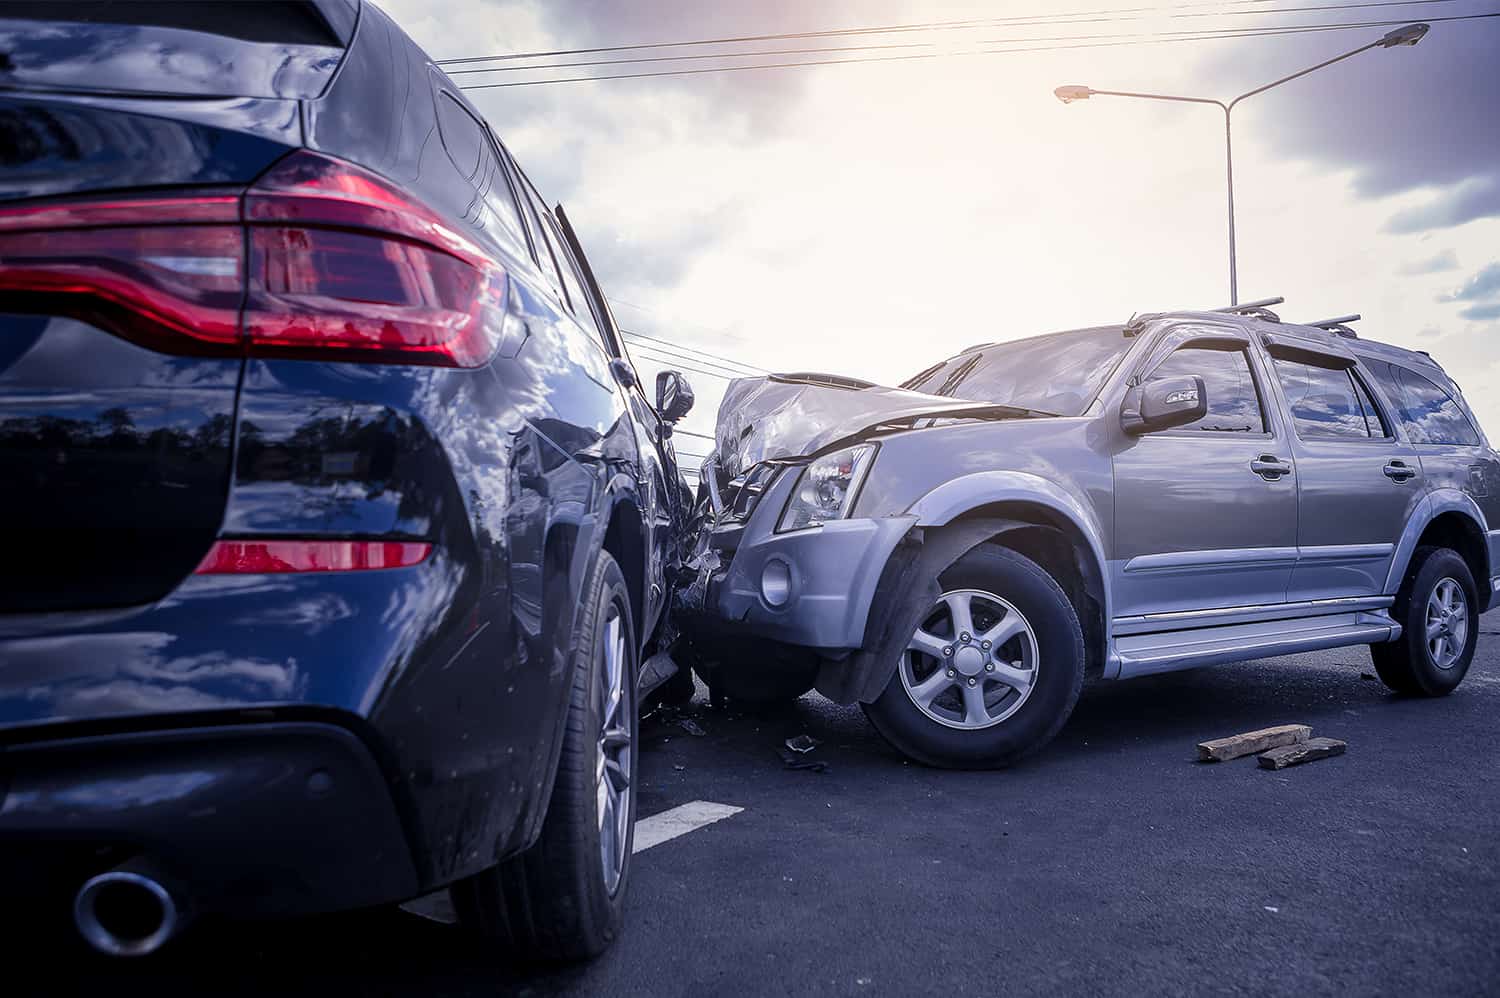 The Nuts and Bolts of Assigning Fault for a Traffic Accident